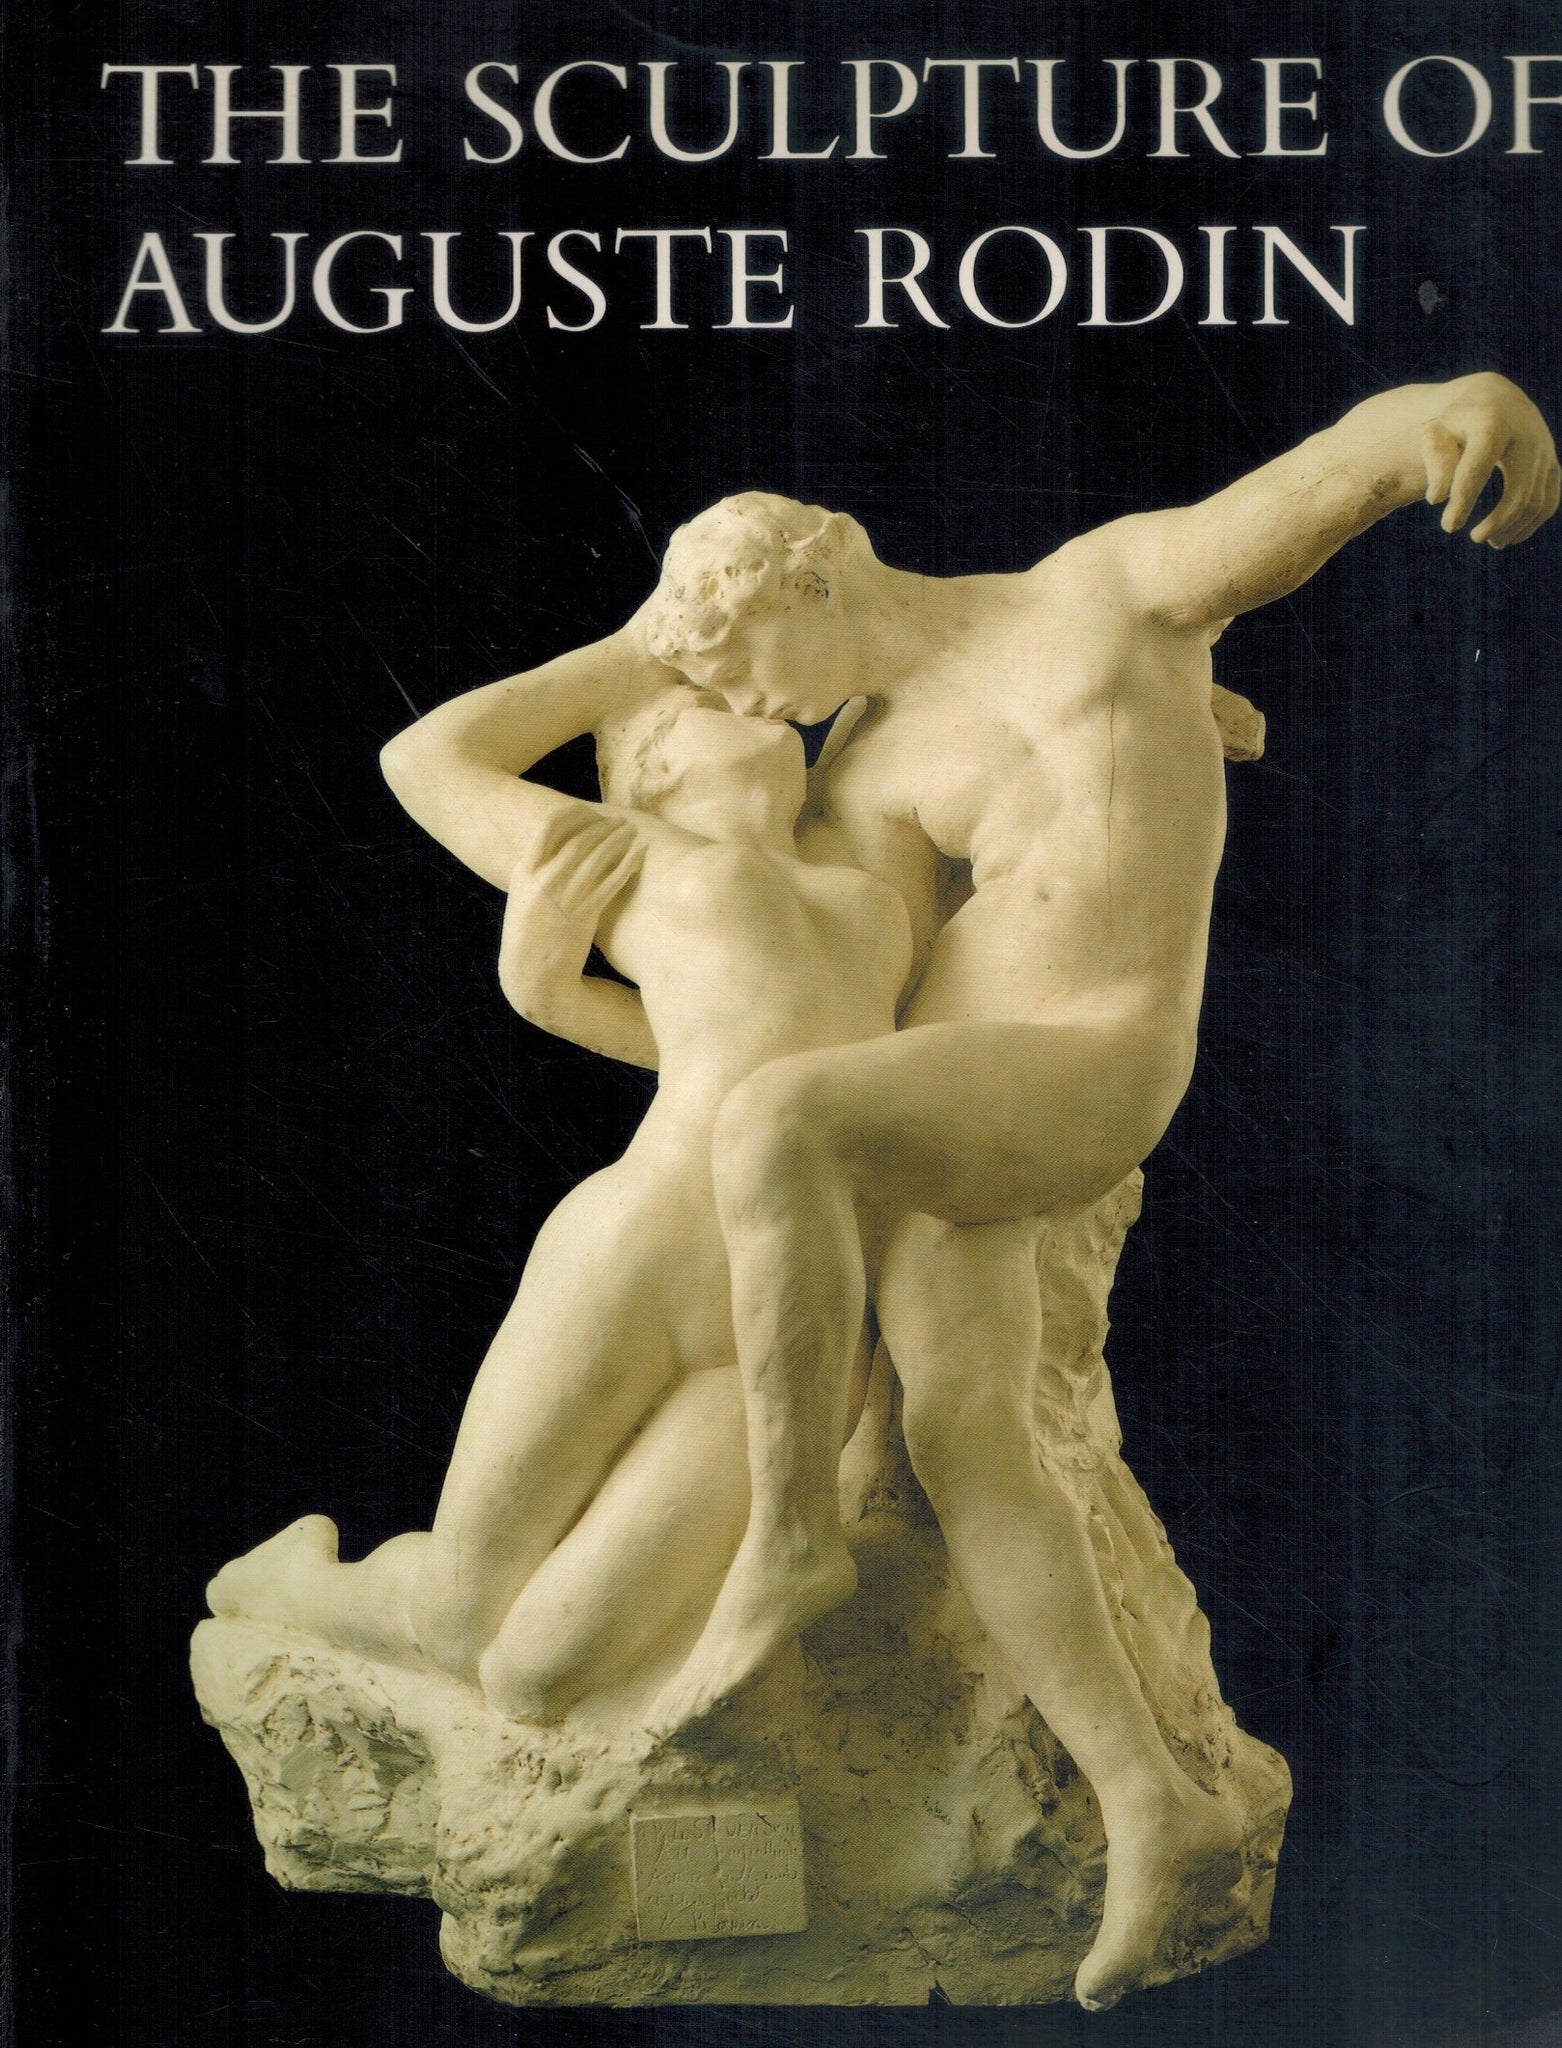 THE SCULPTURE OF AUGUSTE RODIN The Collection of the Rodin Museum,  Philadelphia  by Tancock, John L.